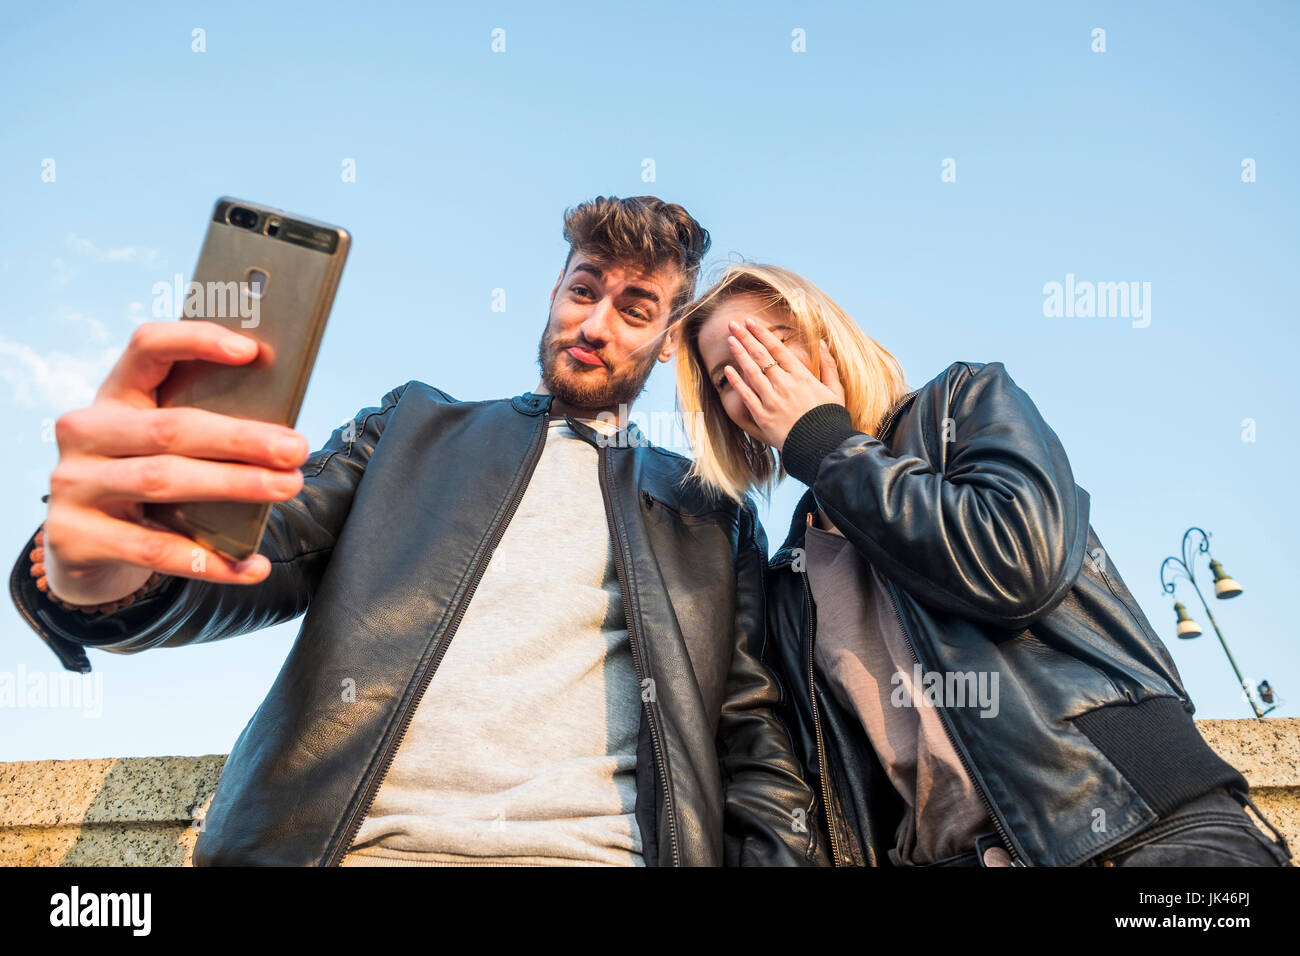 Caucasian couple posing for cell phone selfie Stock Photo